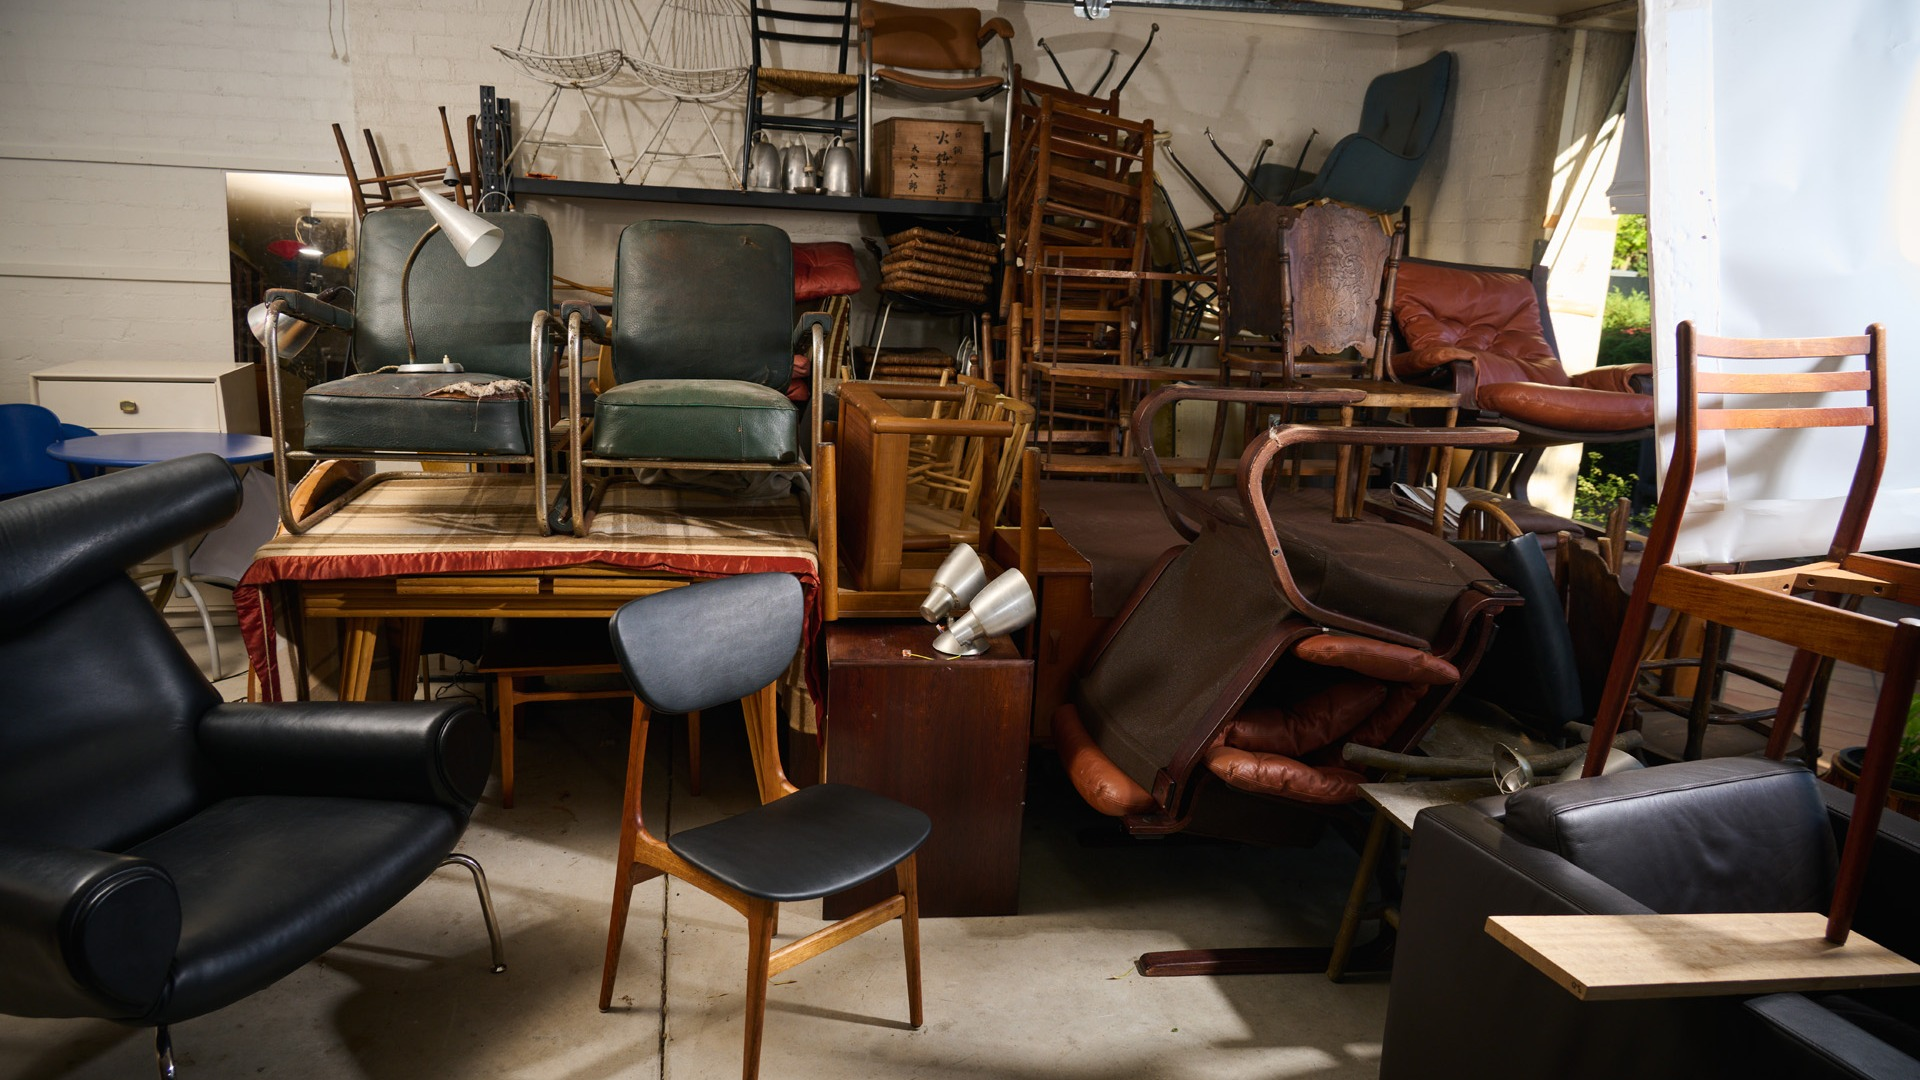 Photo of Edwin Fox Furniture workshop / studio. Collection of furniture and chairs waiting to be restored. 